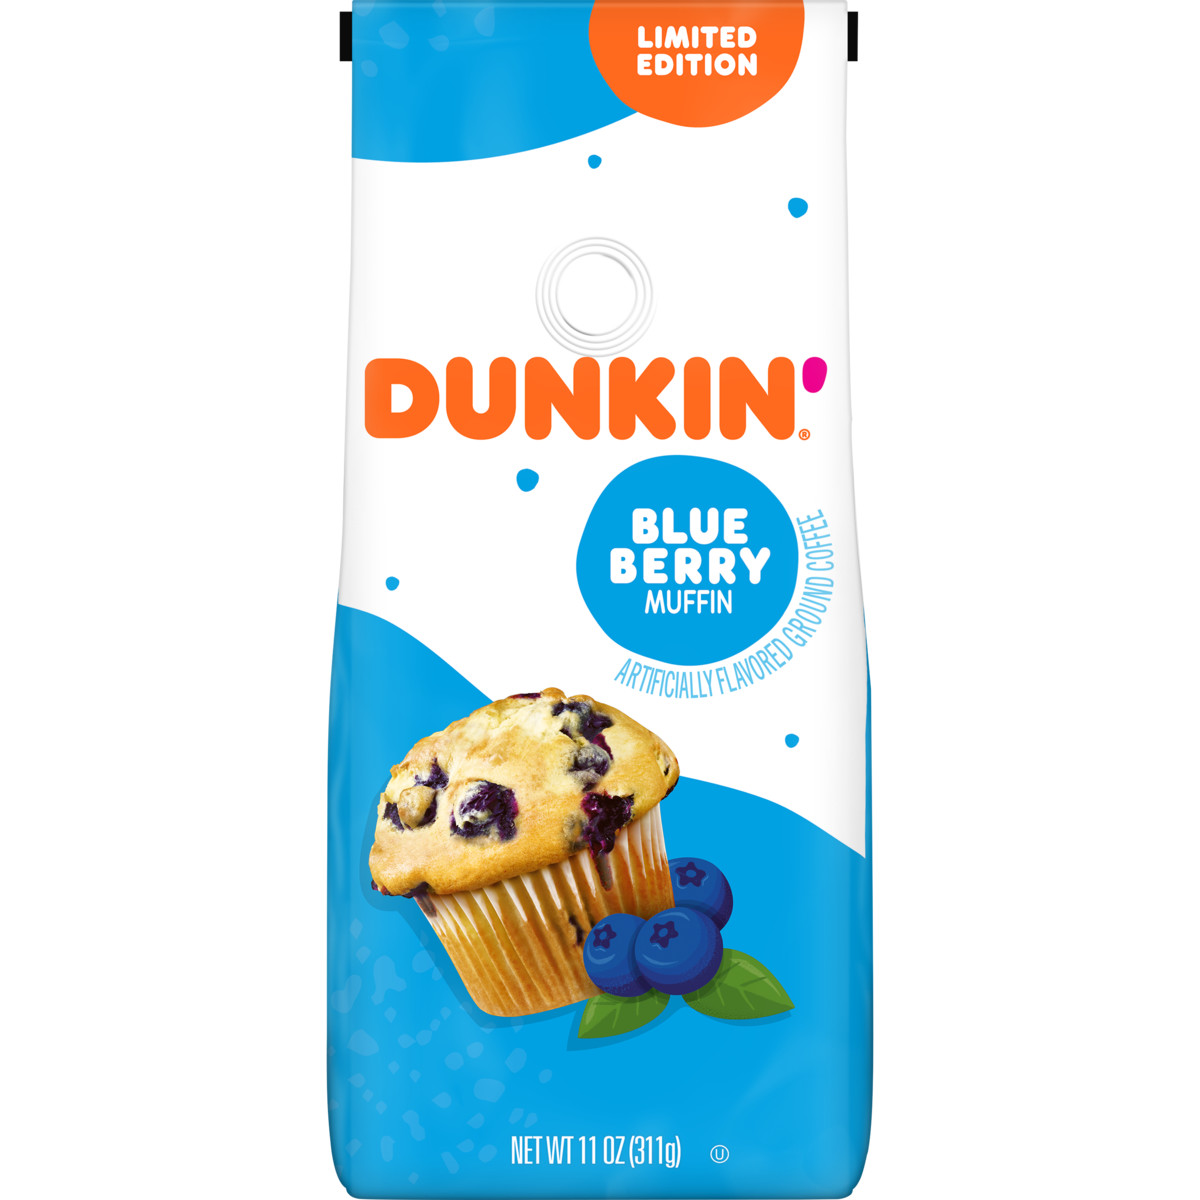 Dunkin'® Blueberry Muffin Artificially Flavored ground coffee in a blue and white bag with an image of a blueberry muffin with three blueberries and two green leaves in the foreground